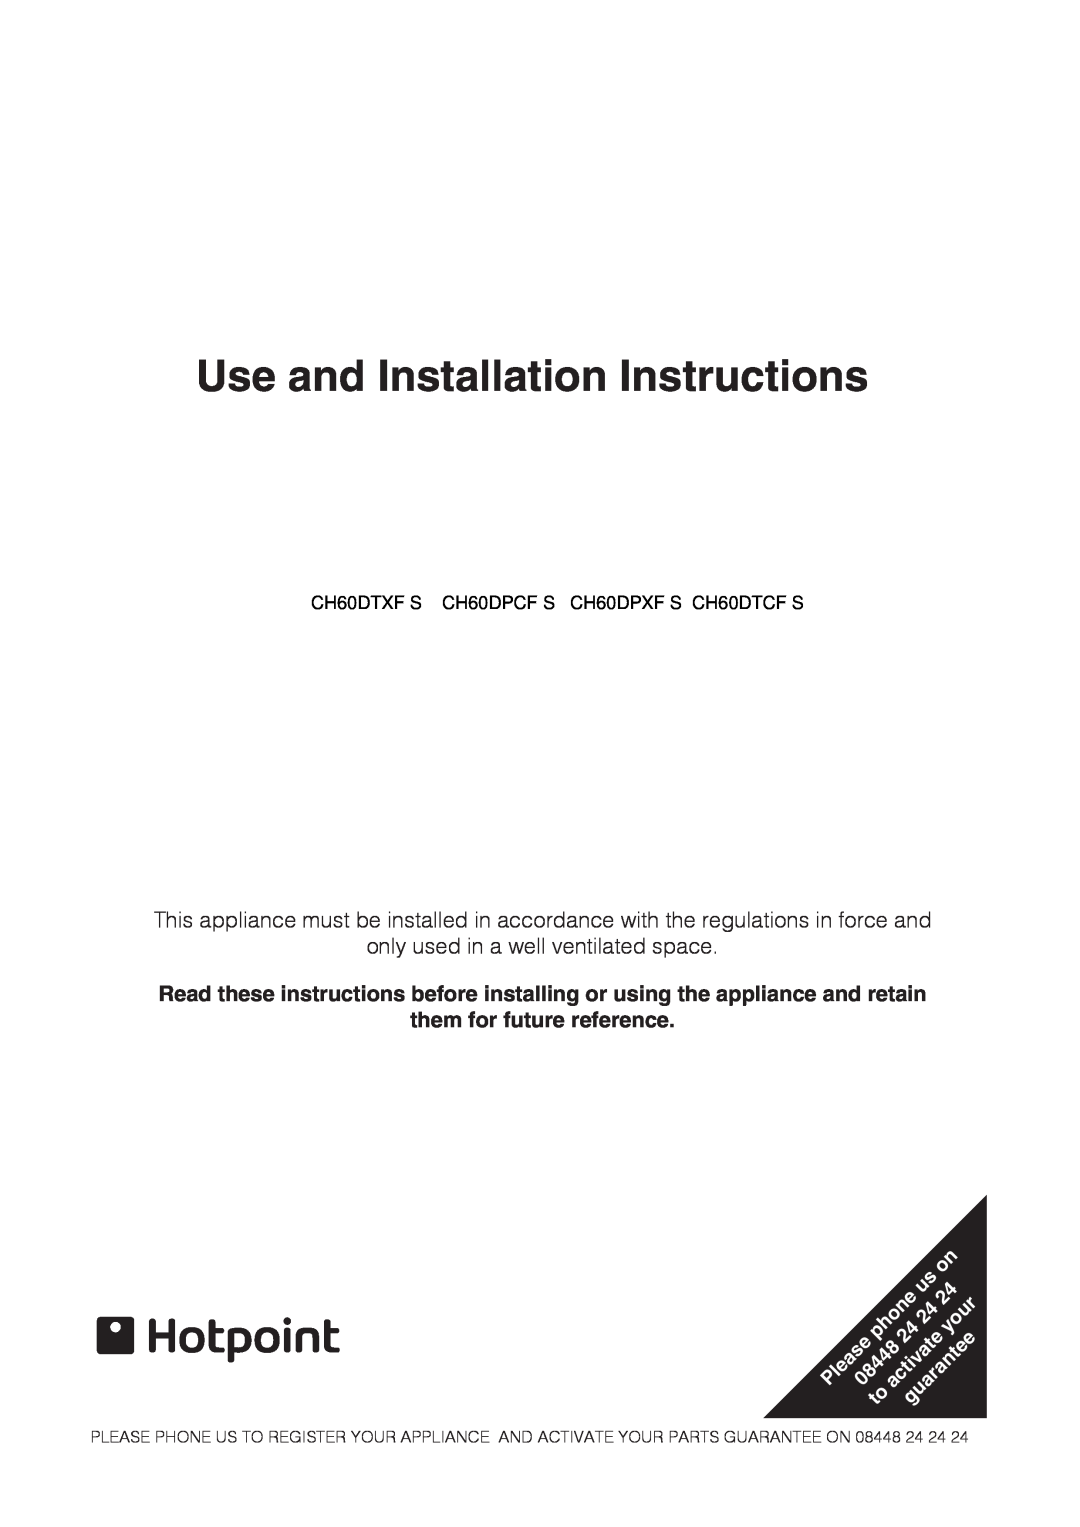 Hotpoint CH60DTCF S installation instructions Use and Installation Instructions, them for future reference, phone, your 